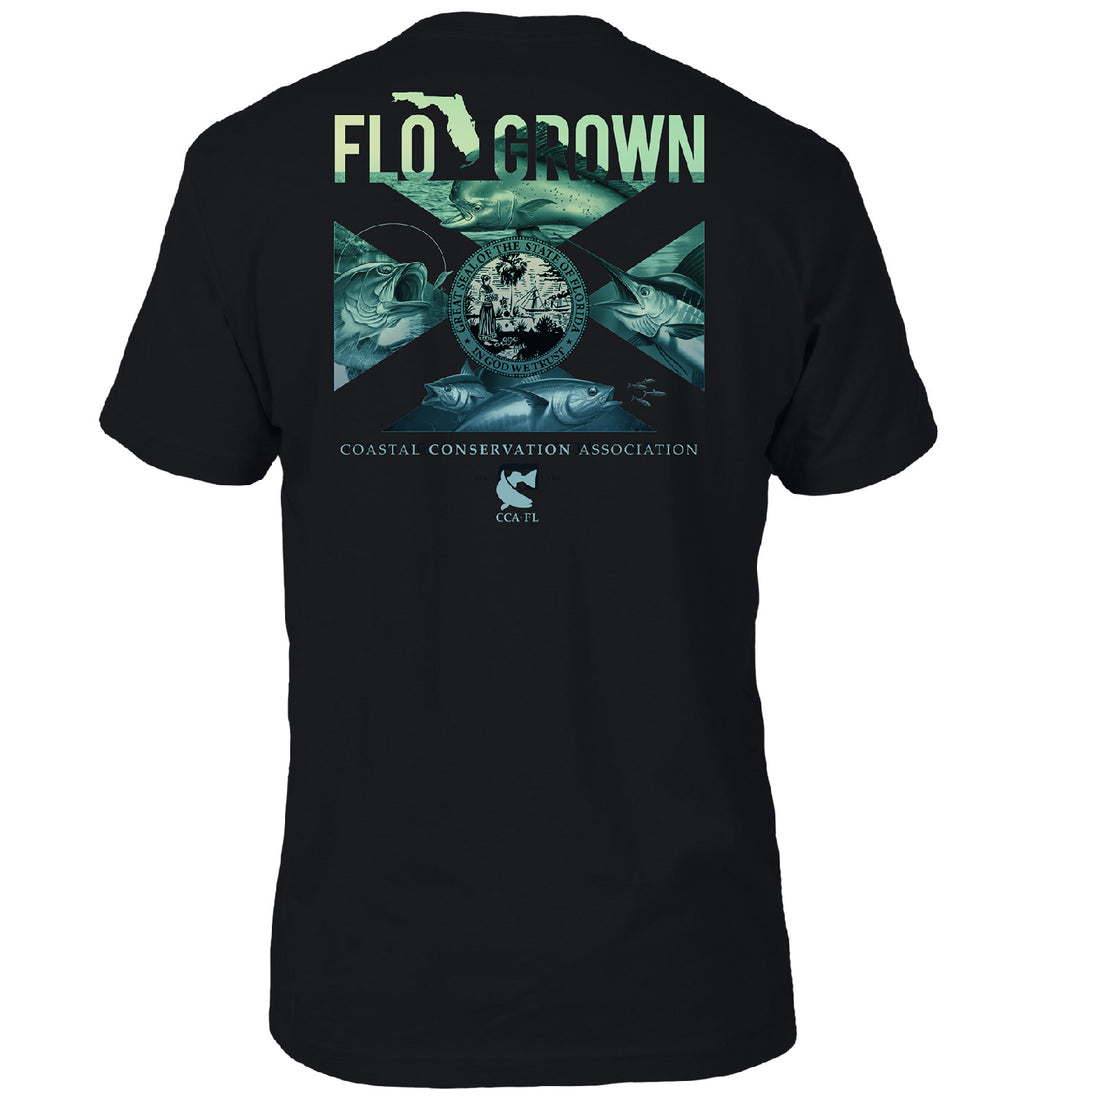 FloGrown Partners with the Coastal Conservation Association